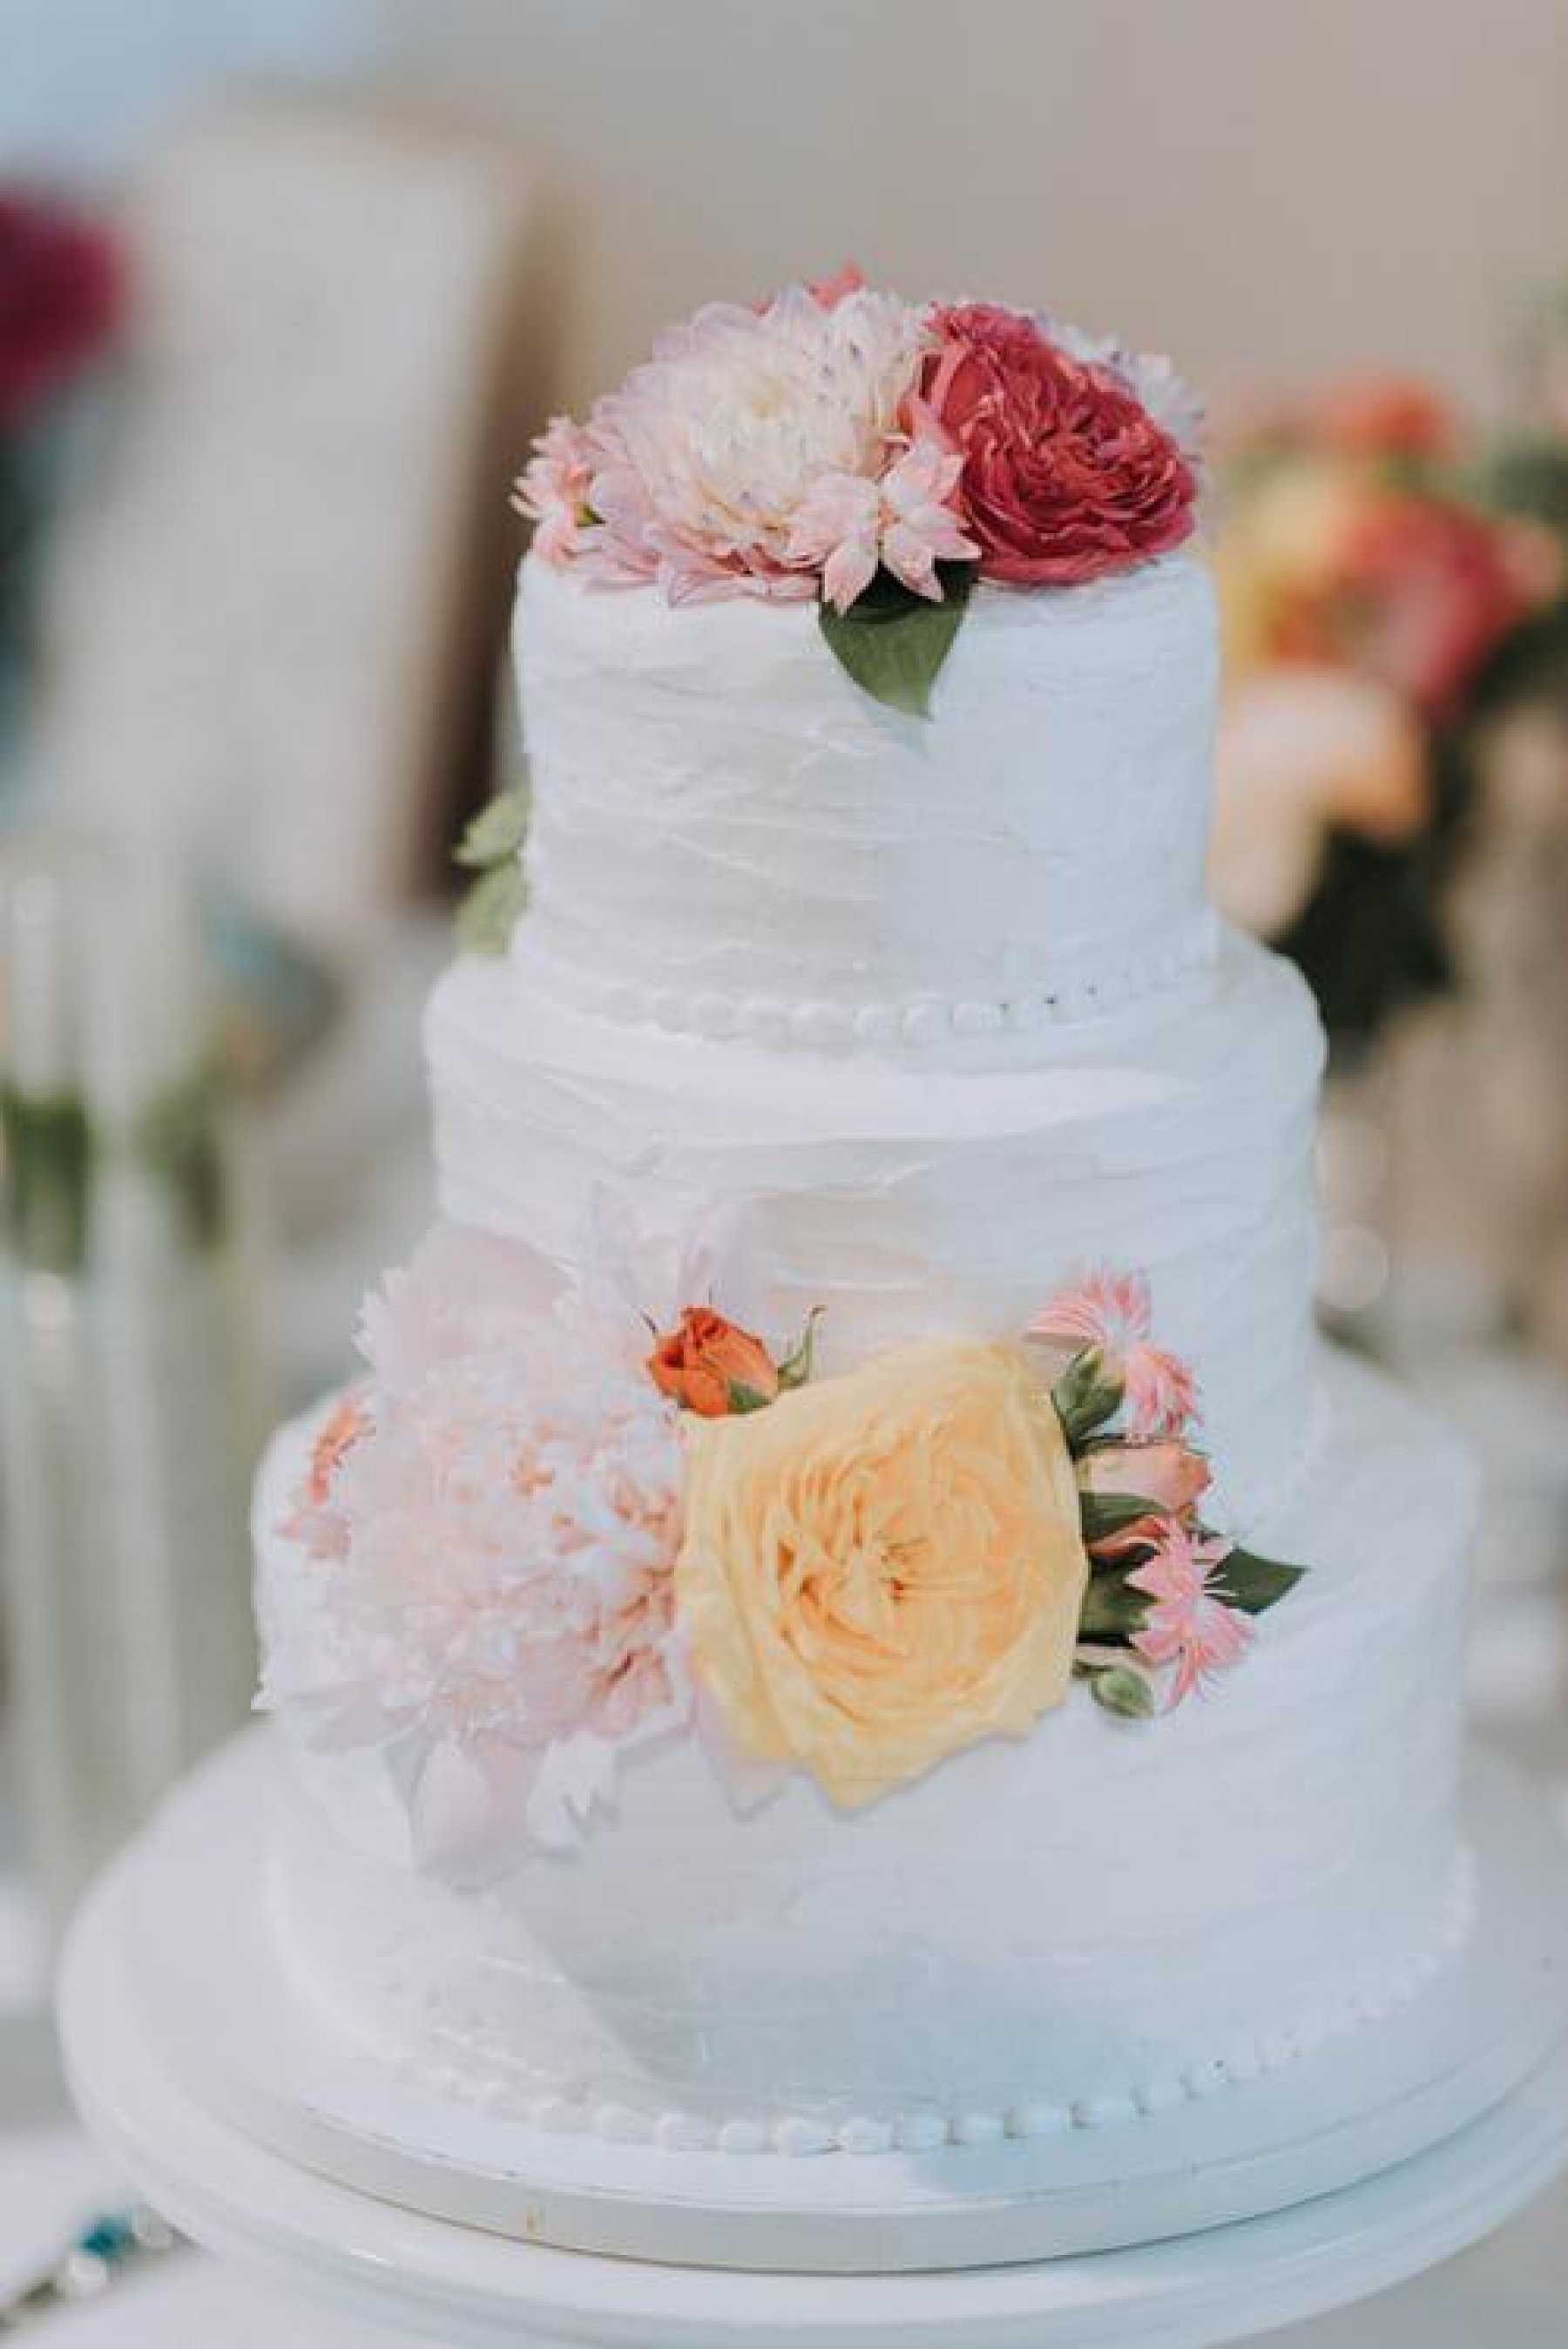 A close up of a wedding cake with pink, yellow and red flowers on it